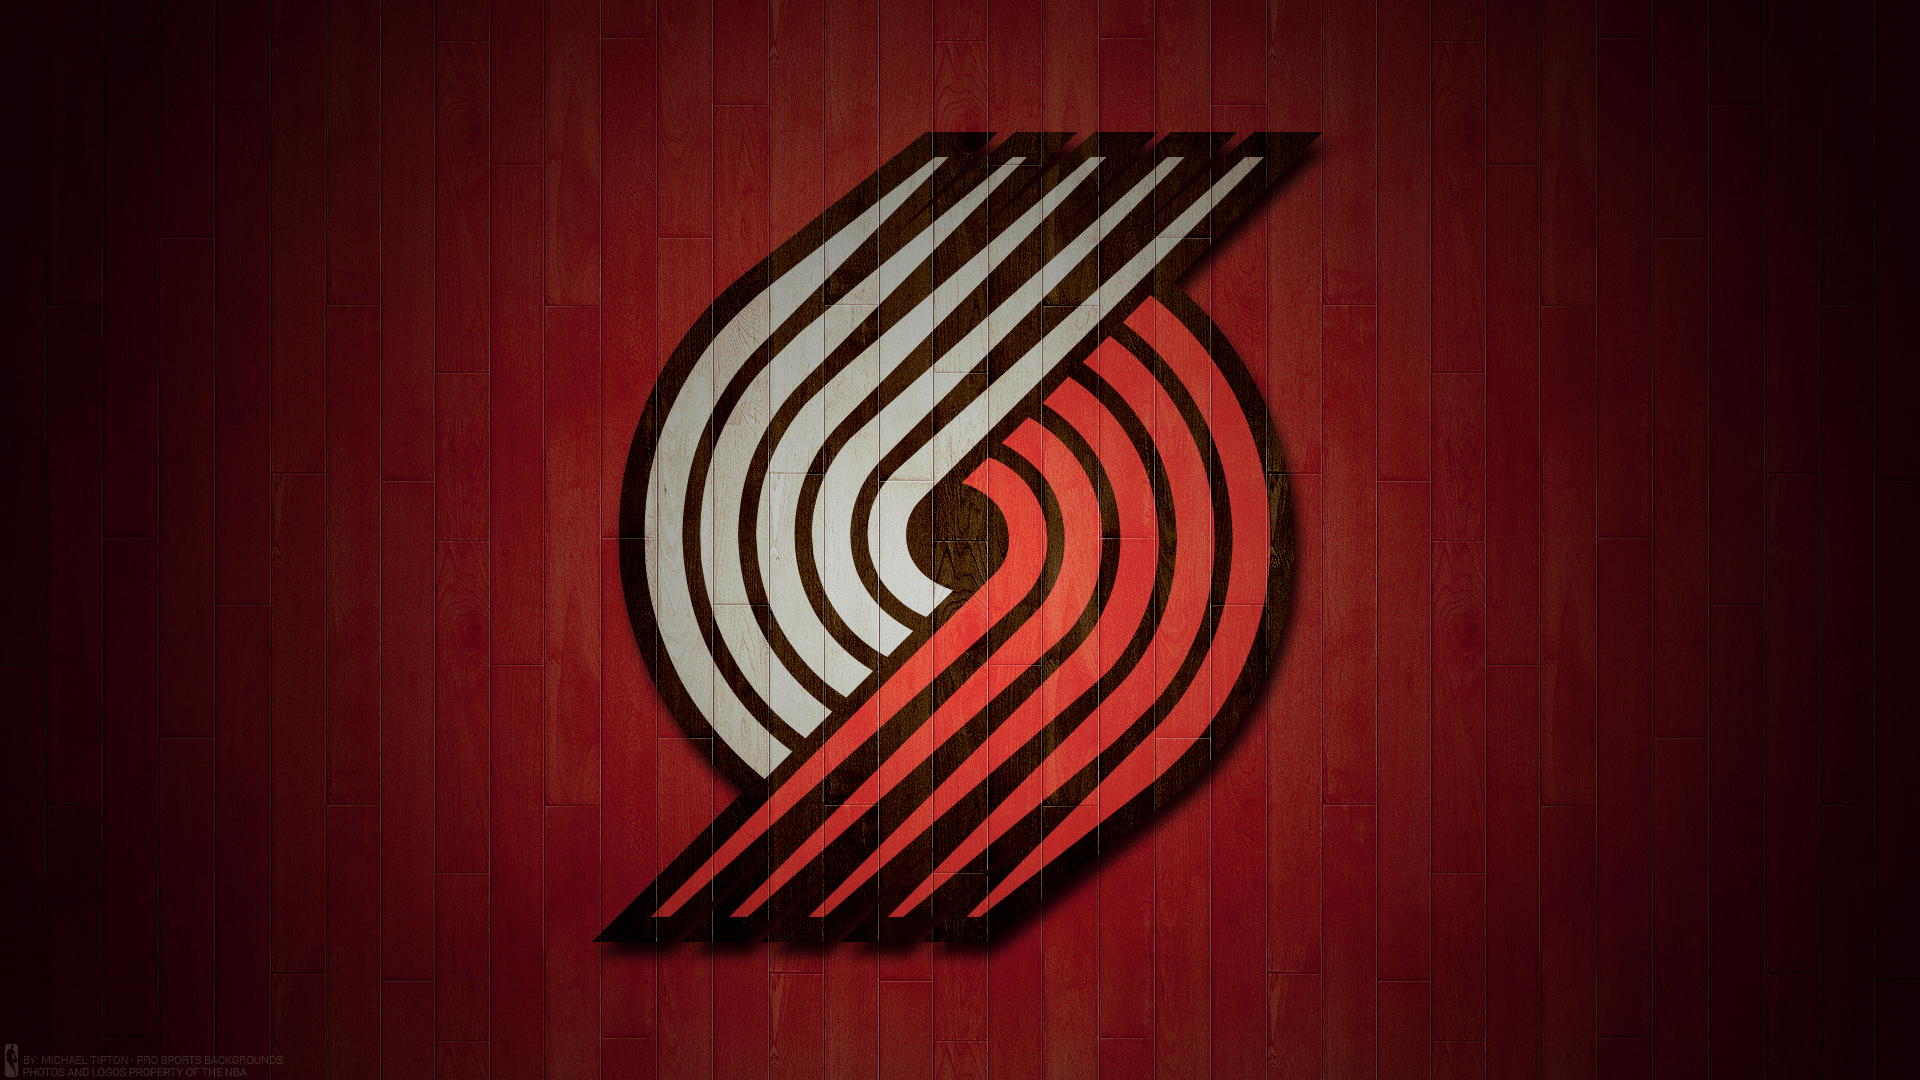 Portland Trail Blazers Wallpaper. iPhone. Android